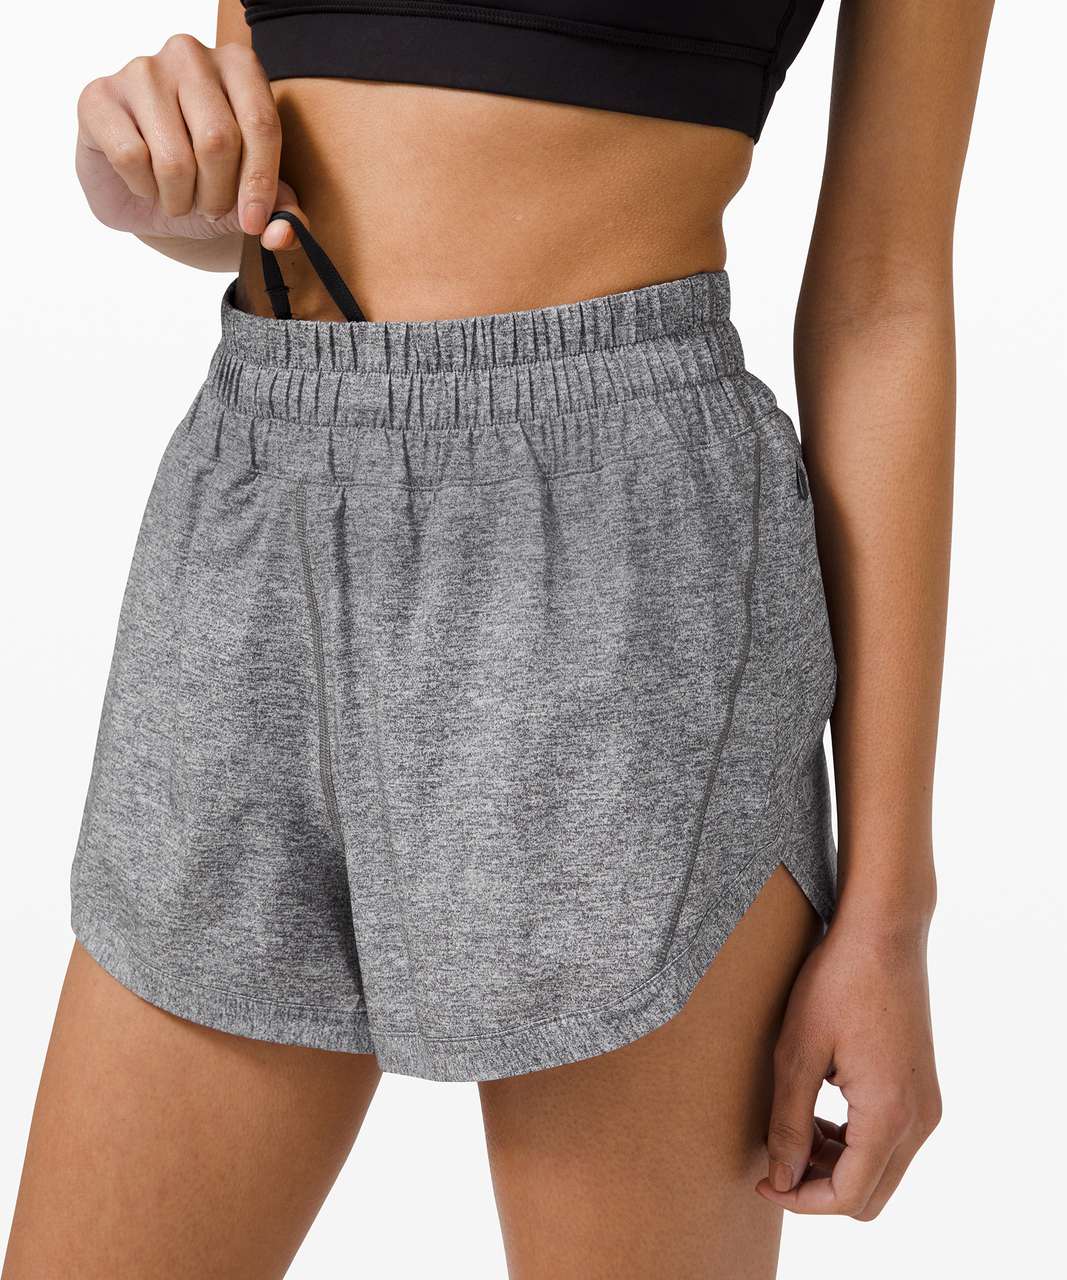 Lululemon athletica Track That High-Rise Lined Short 3, Women's Shorts